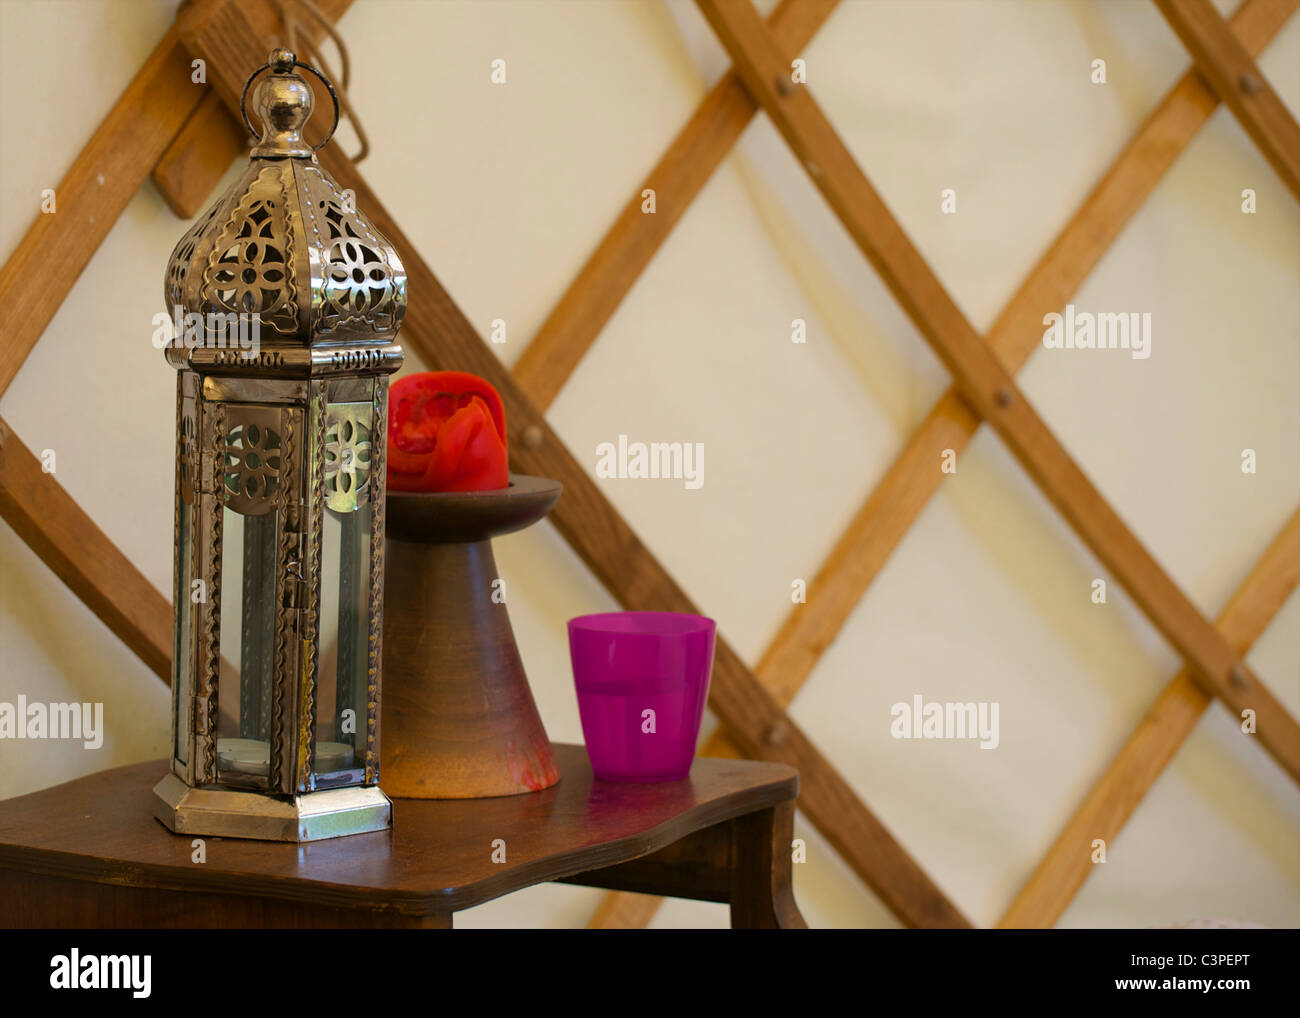 Candles inside a yurt. Stock Photo